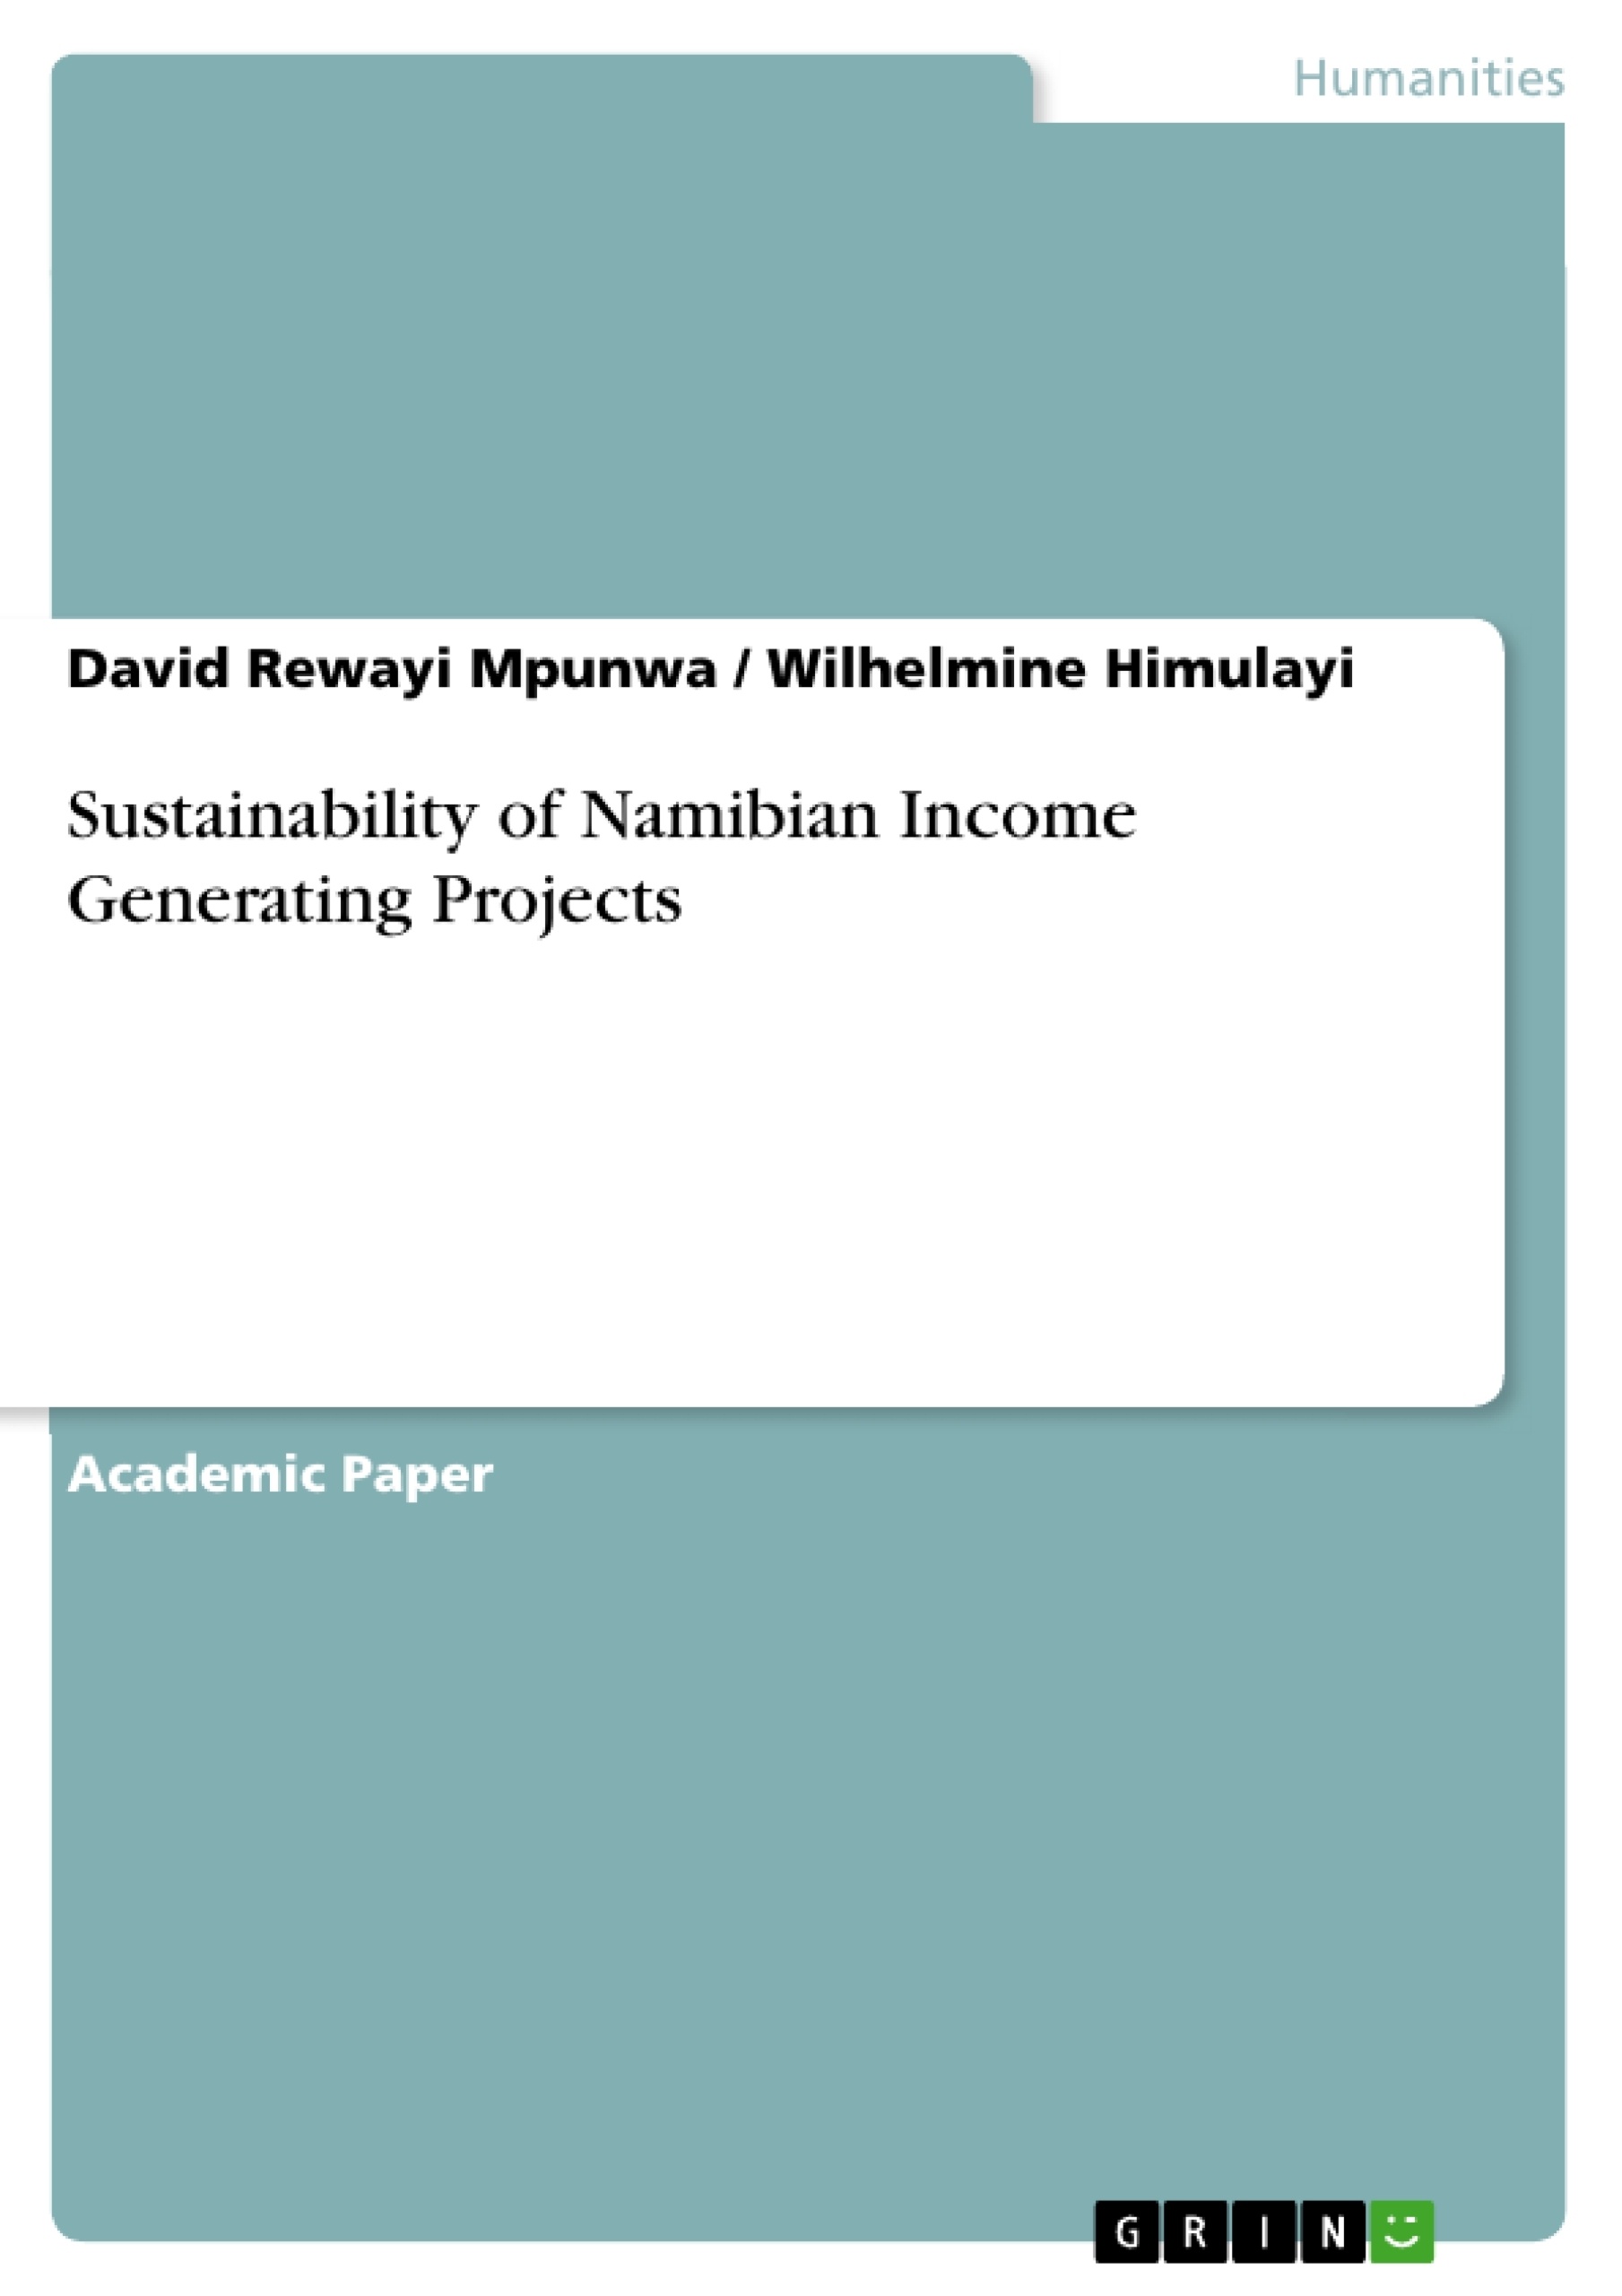 Title: Sustainability of Namibian Income Generating Projects